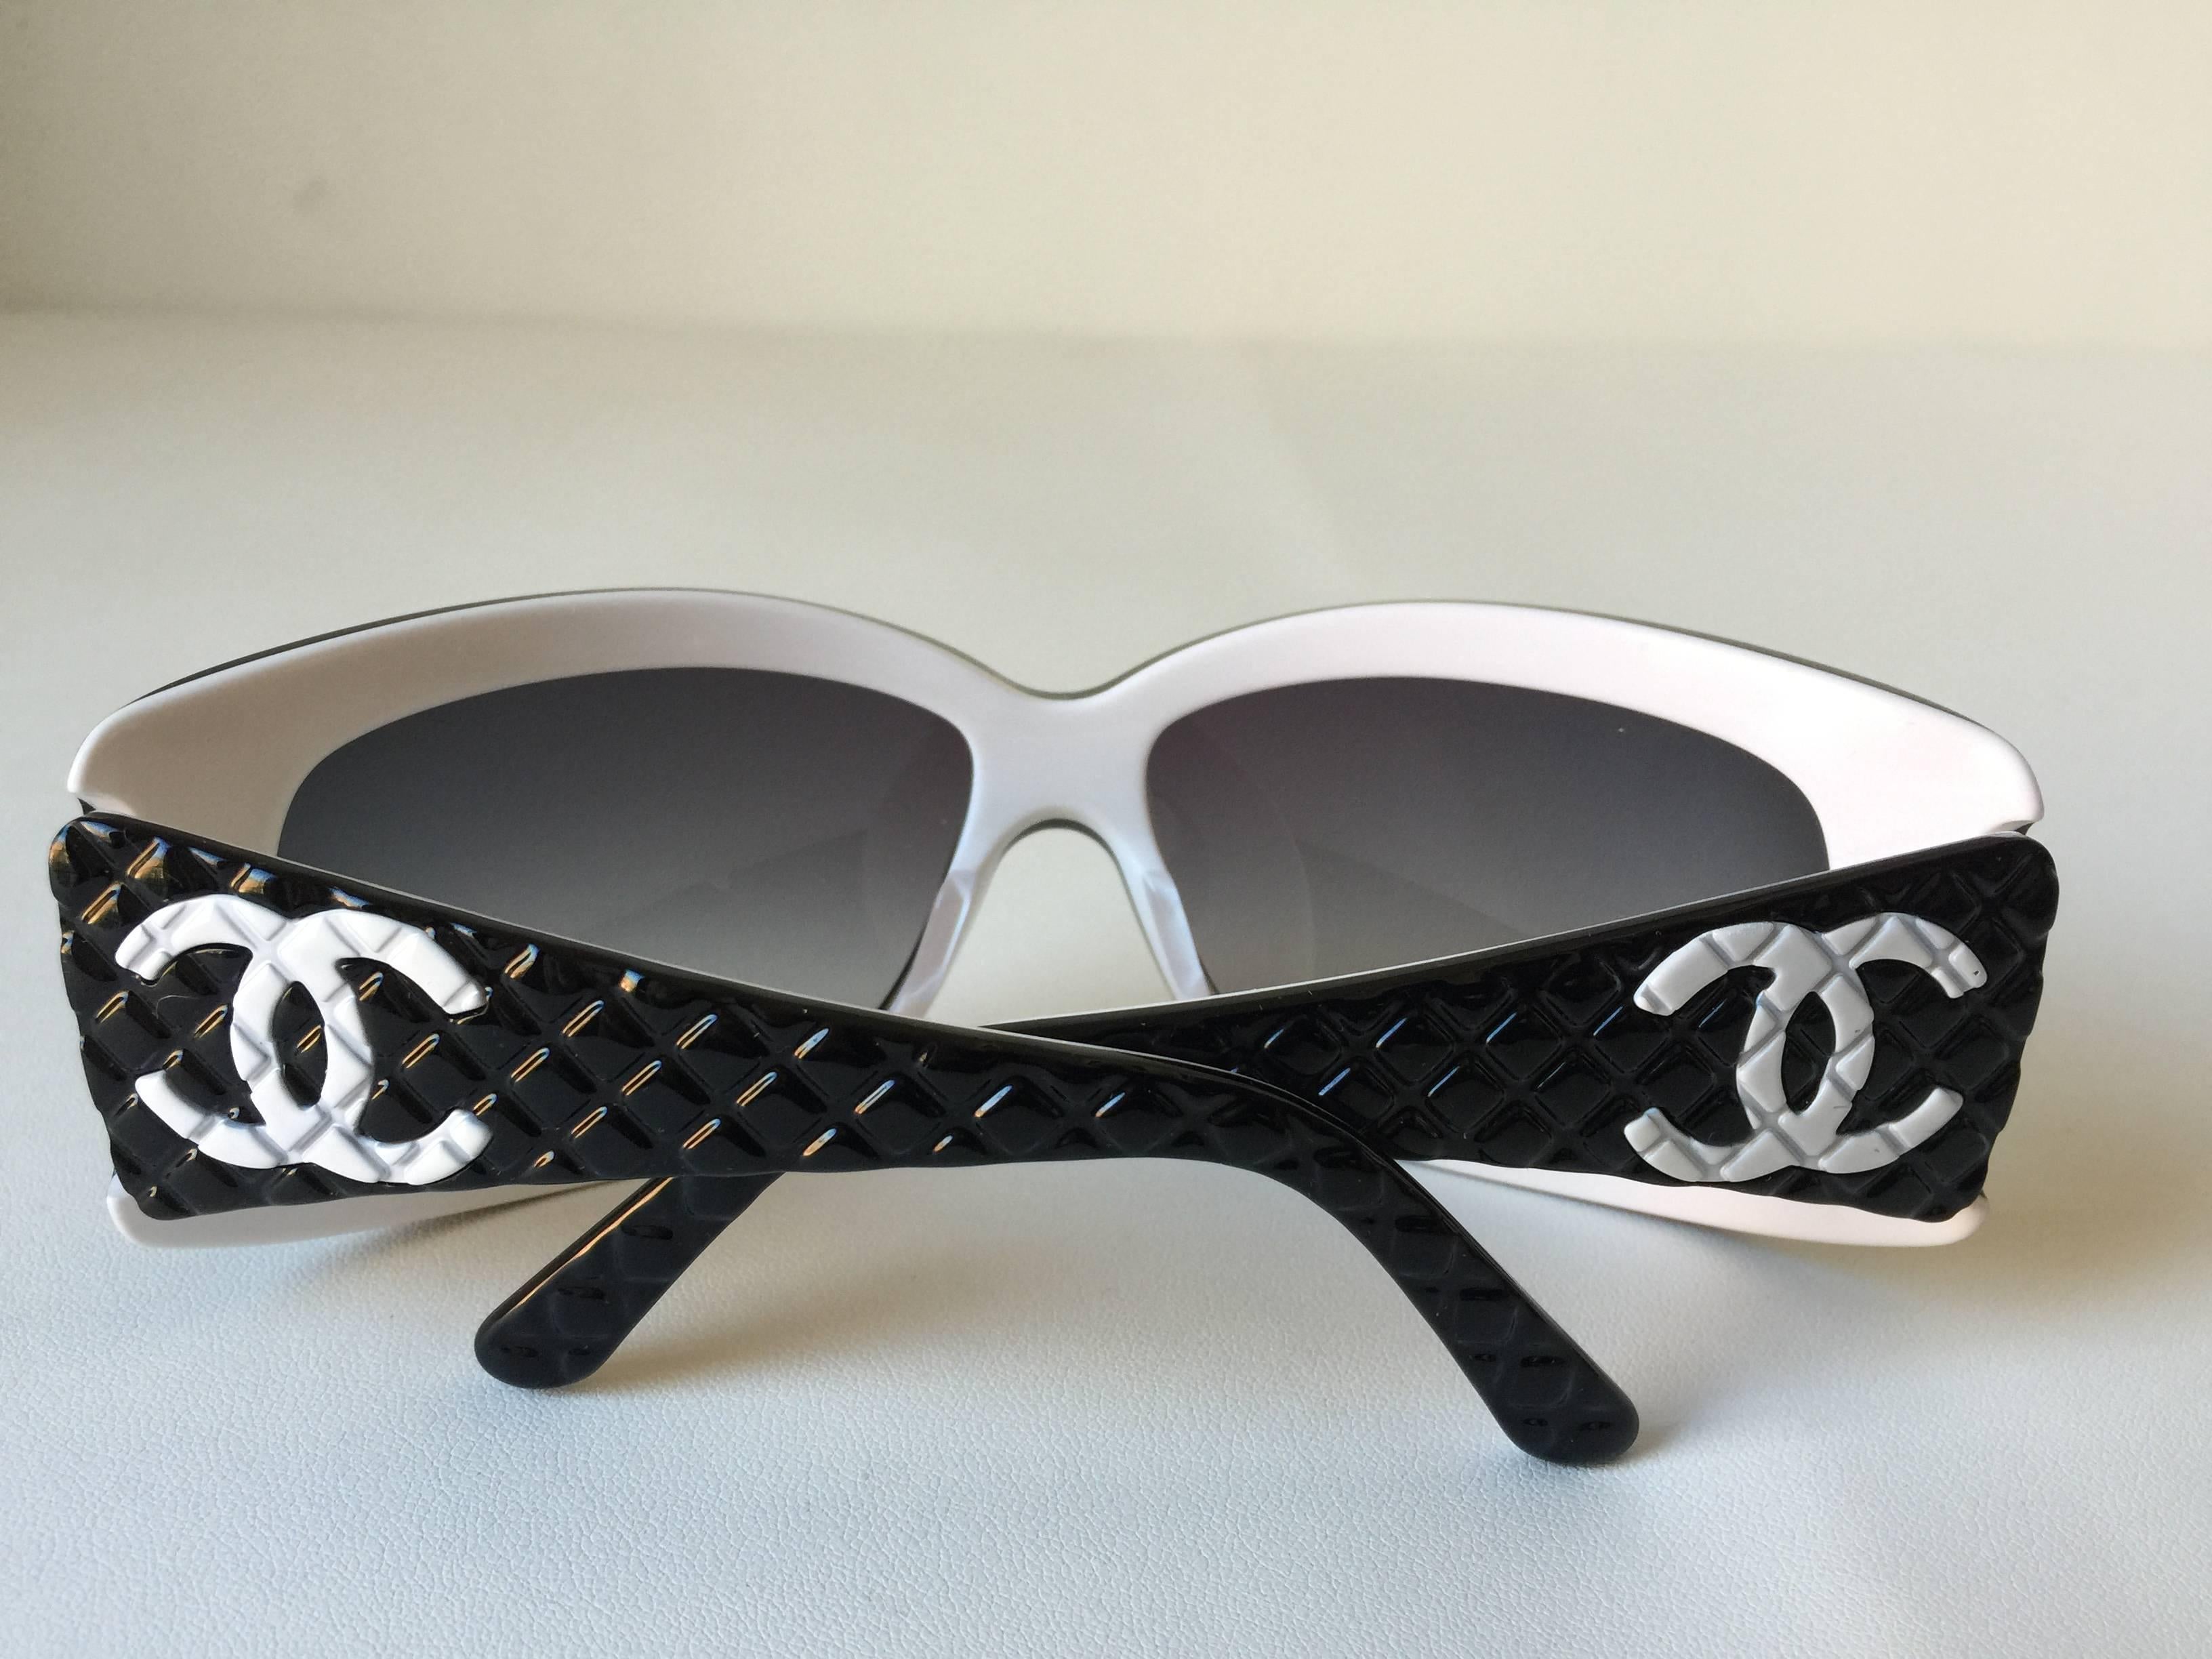 Wonderful vintage Impeccable  sunglasses...comes with pouch and case...
stylish 2 tone.....
quilted sides with contrasting white CC logo....
square rims 
Timeless style only from Chanel....